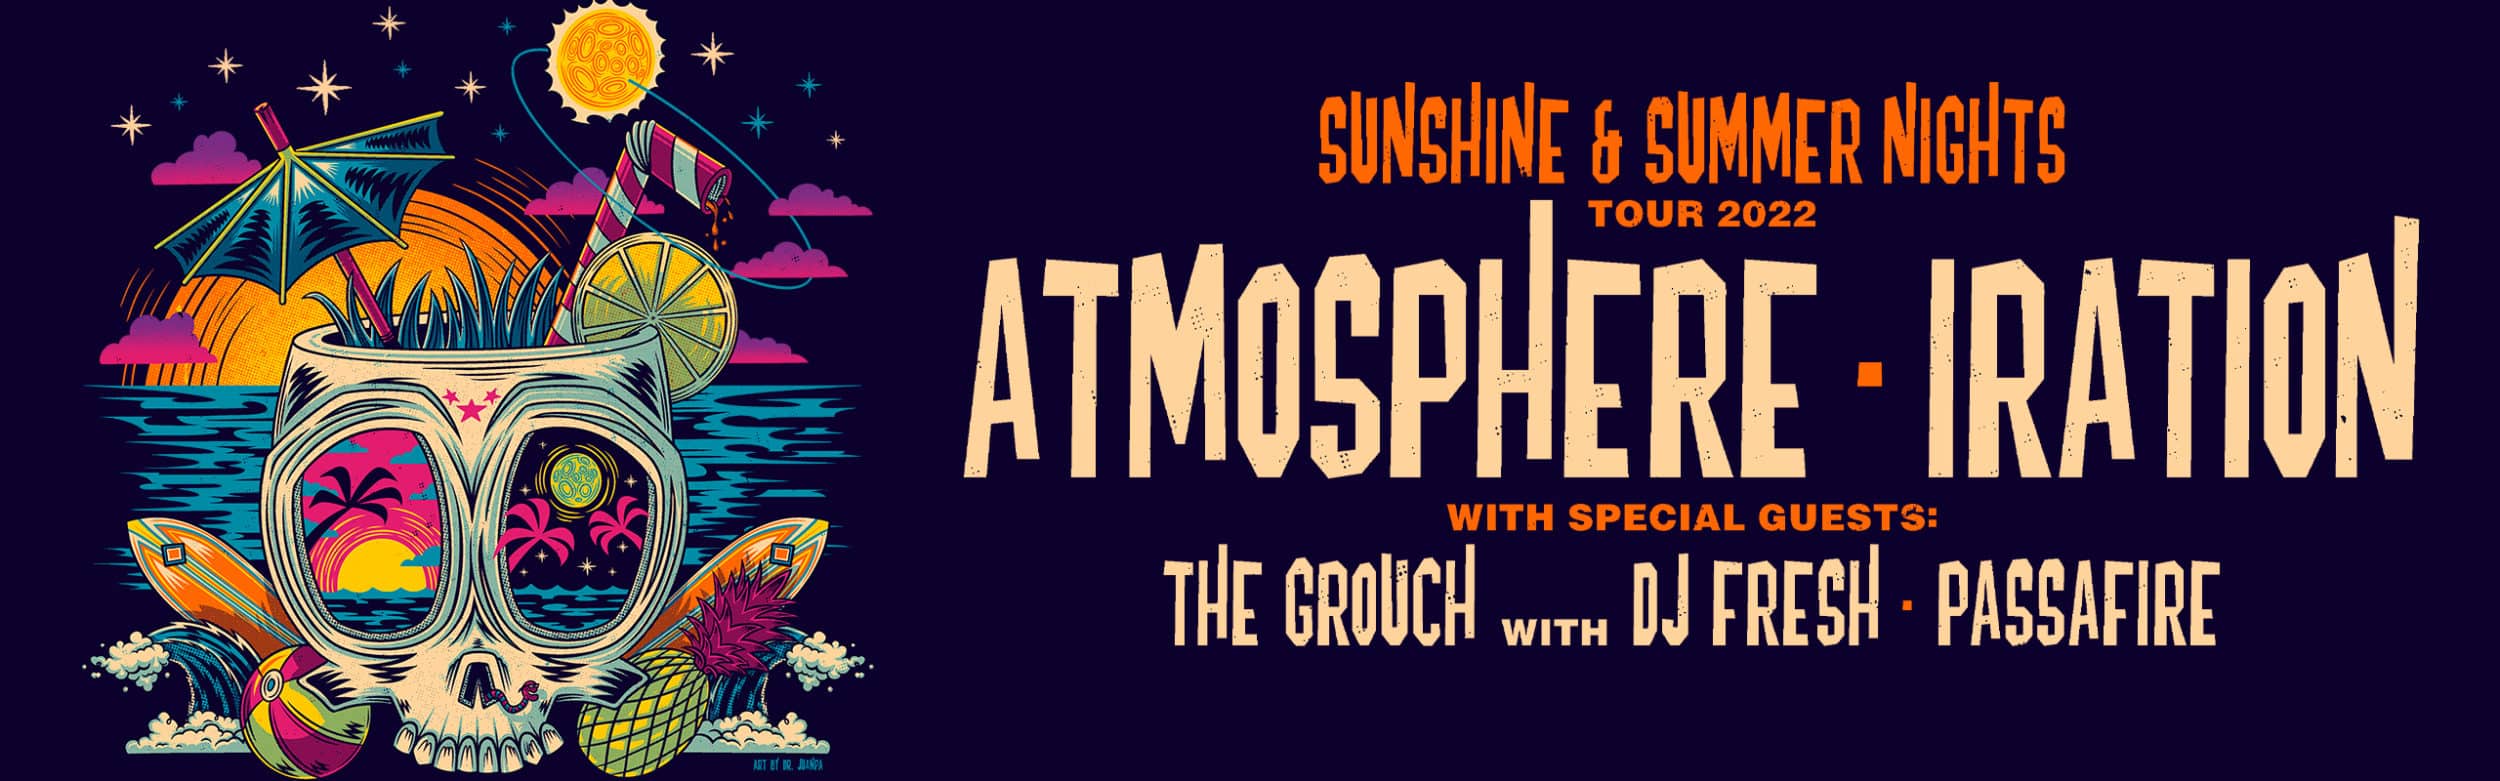 Atmosphere x Iration: Sunshine and Summer Nights Tour